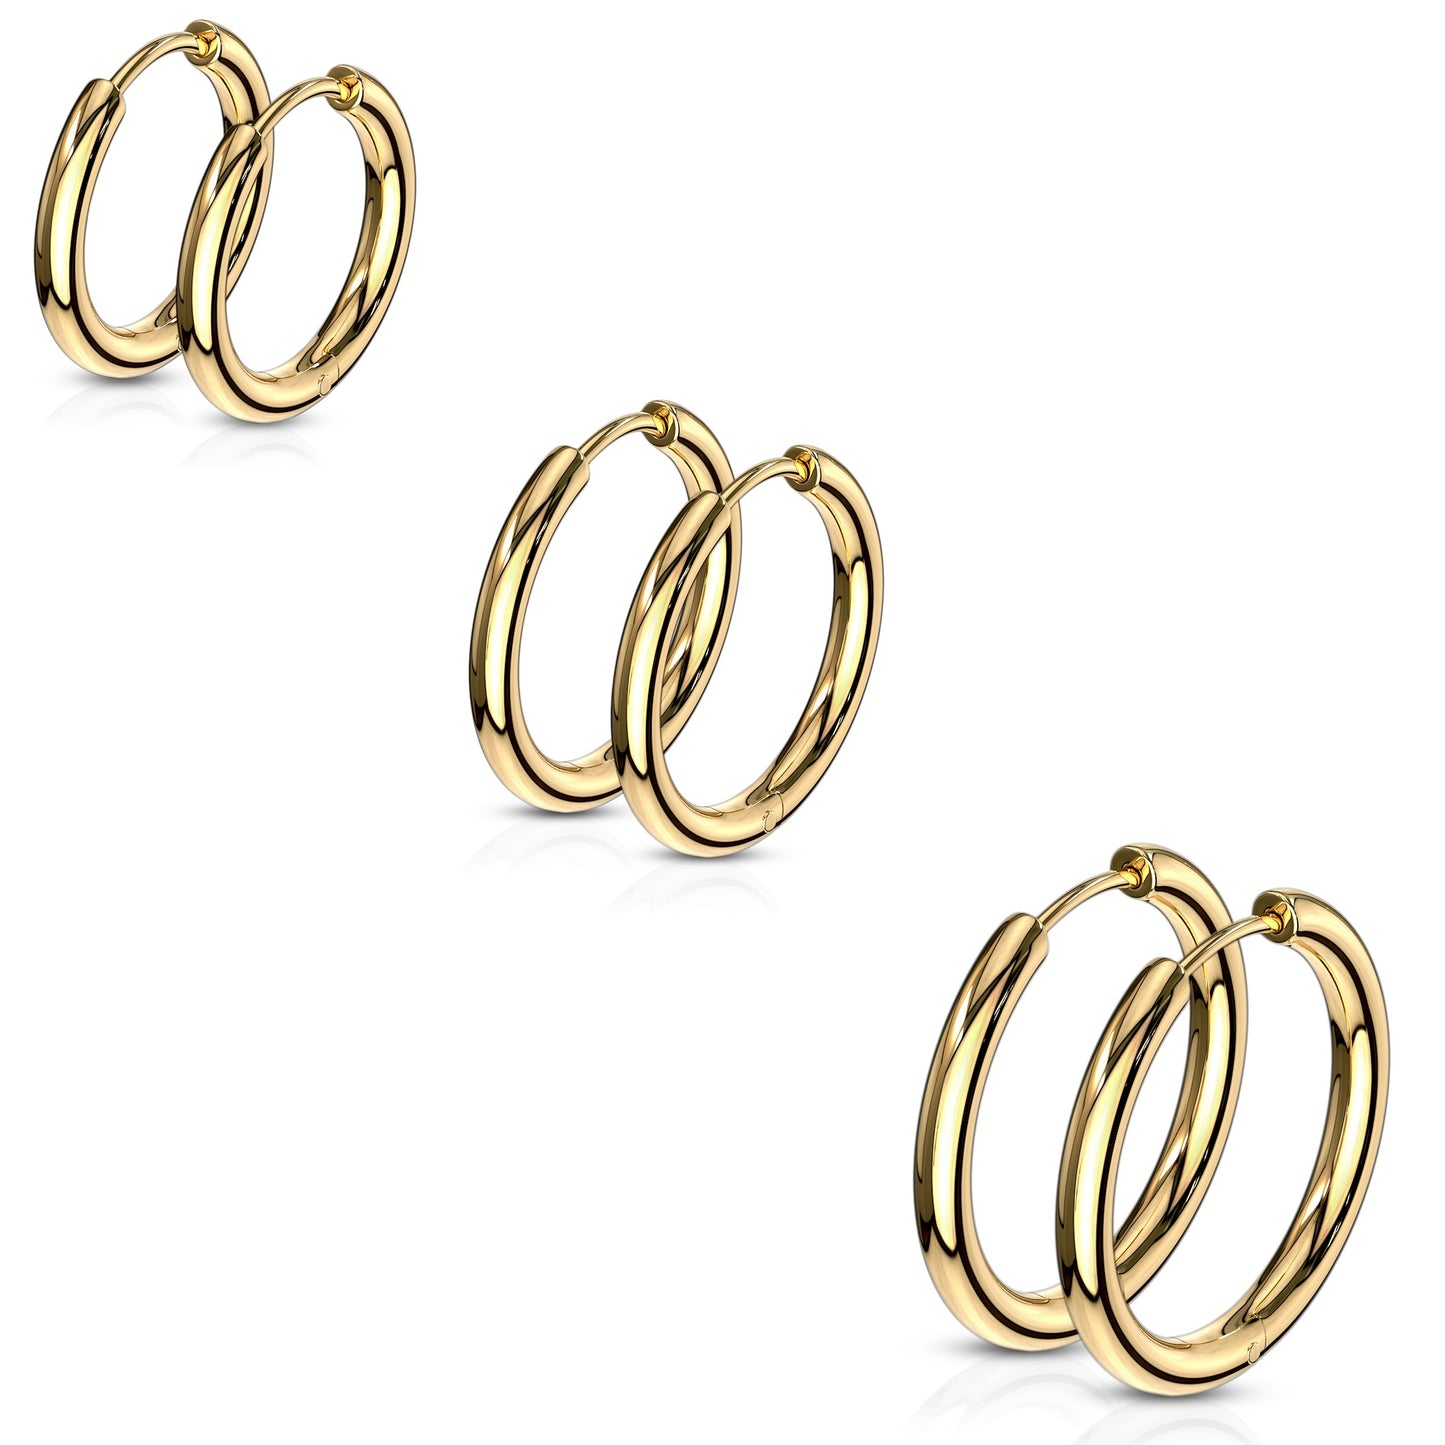 Set of 3 Pairs of 2.5mm Thick Round Hinged Hoop Earrings - 316L Stainless Steel